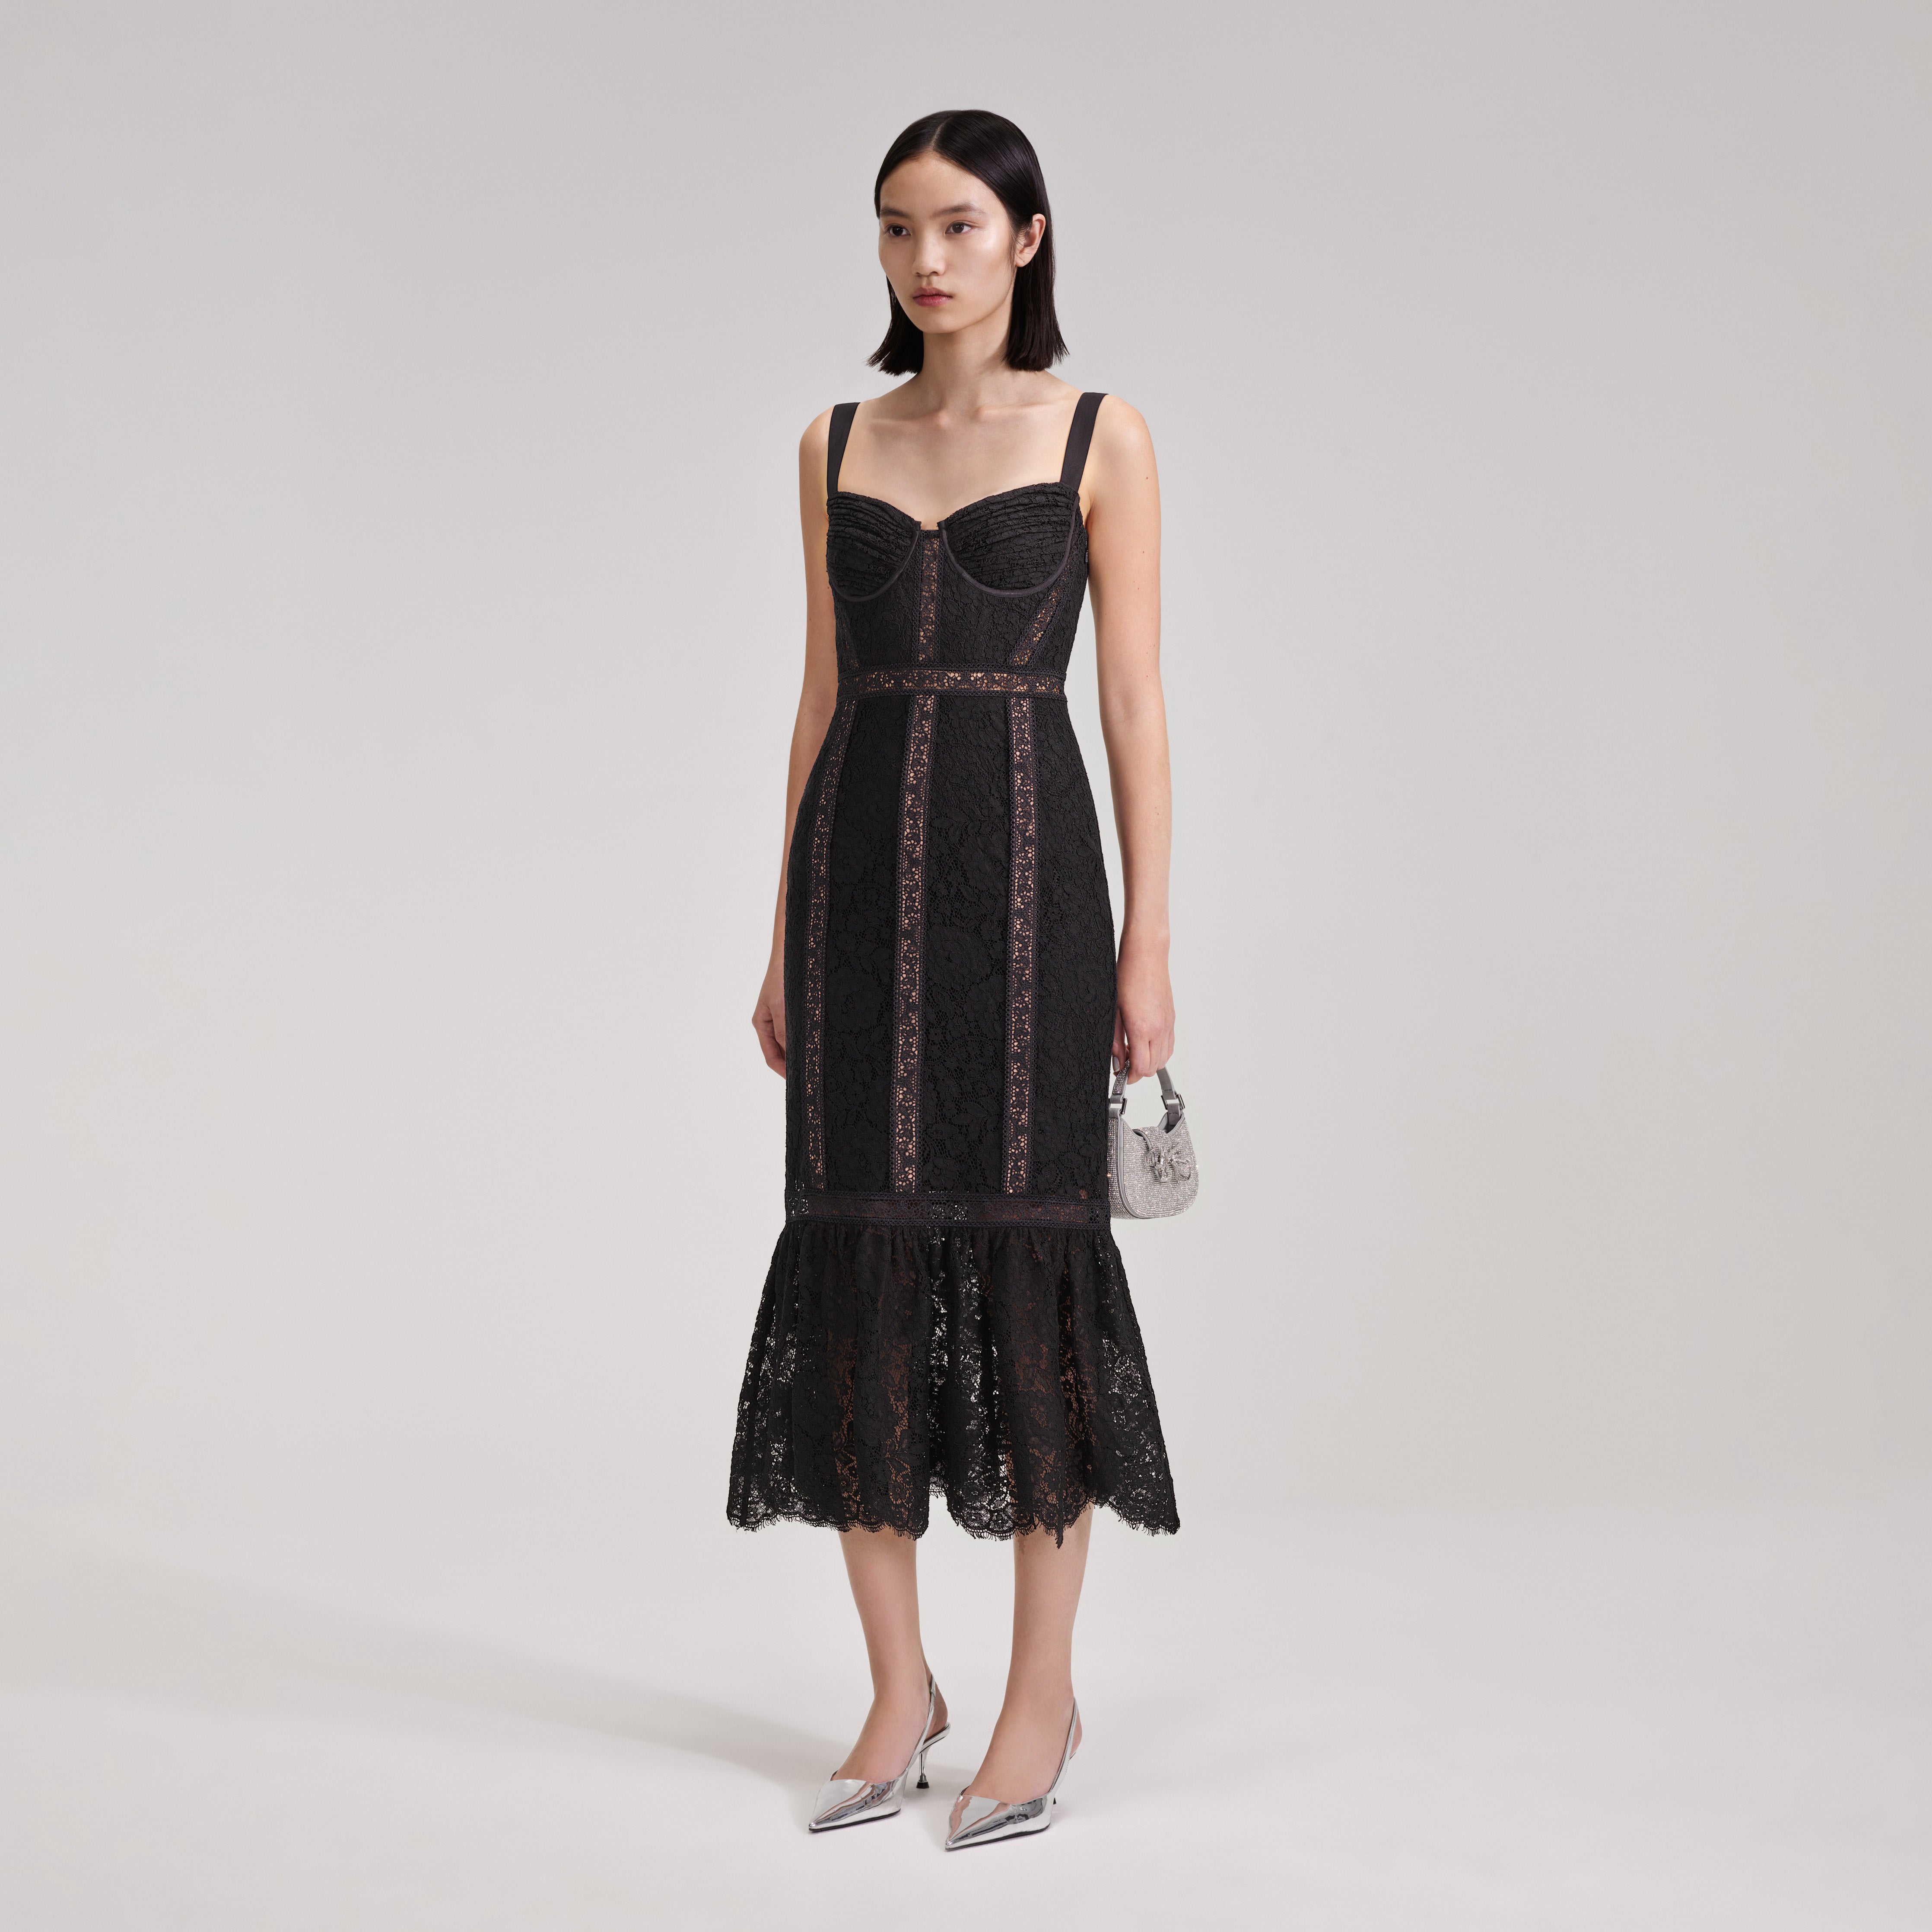 【Her lip to】Cord Lace Trimmed Midi Dress着丈約122cm